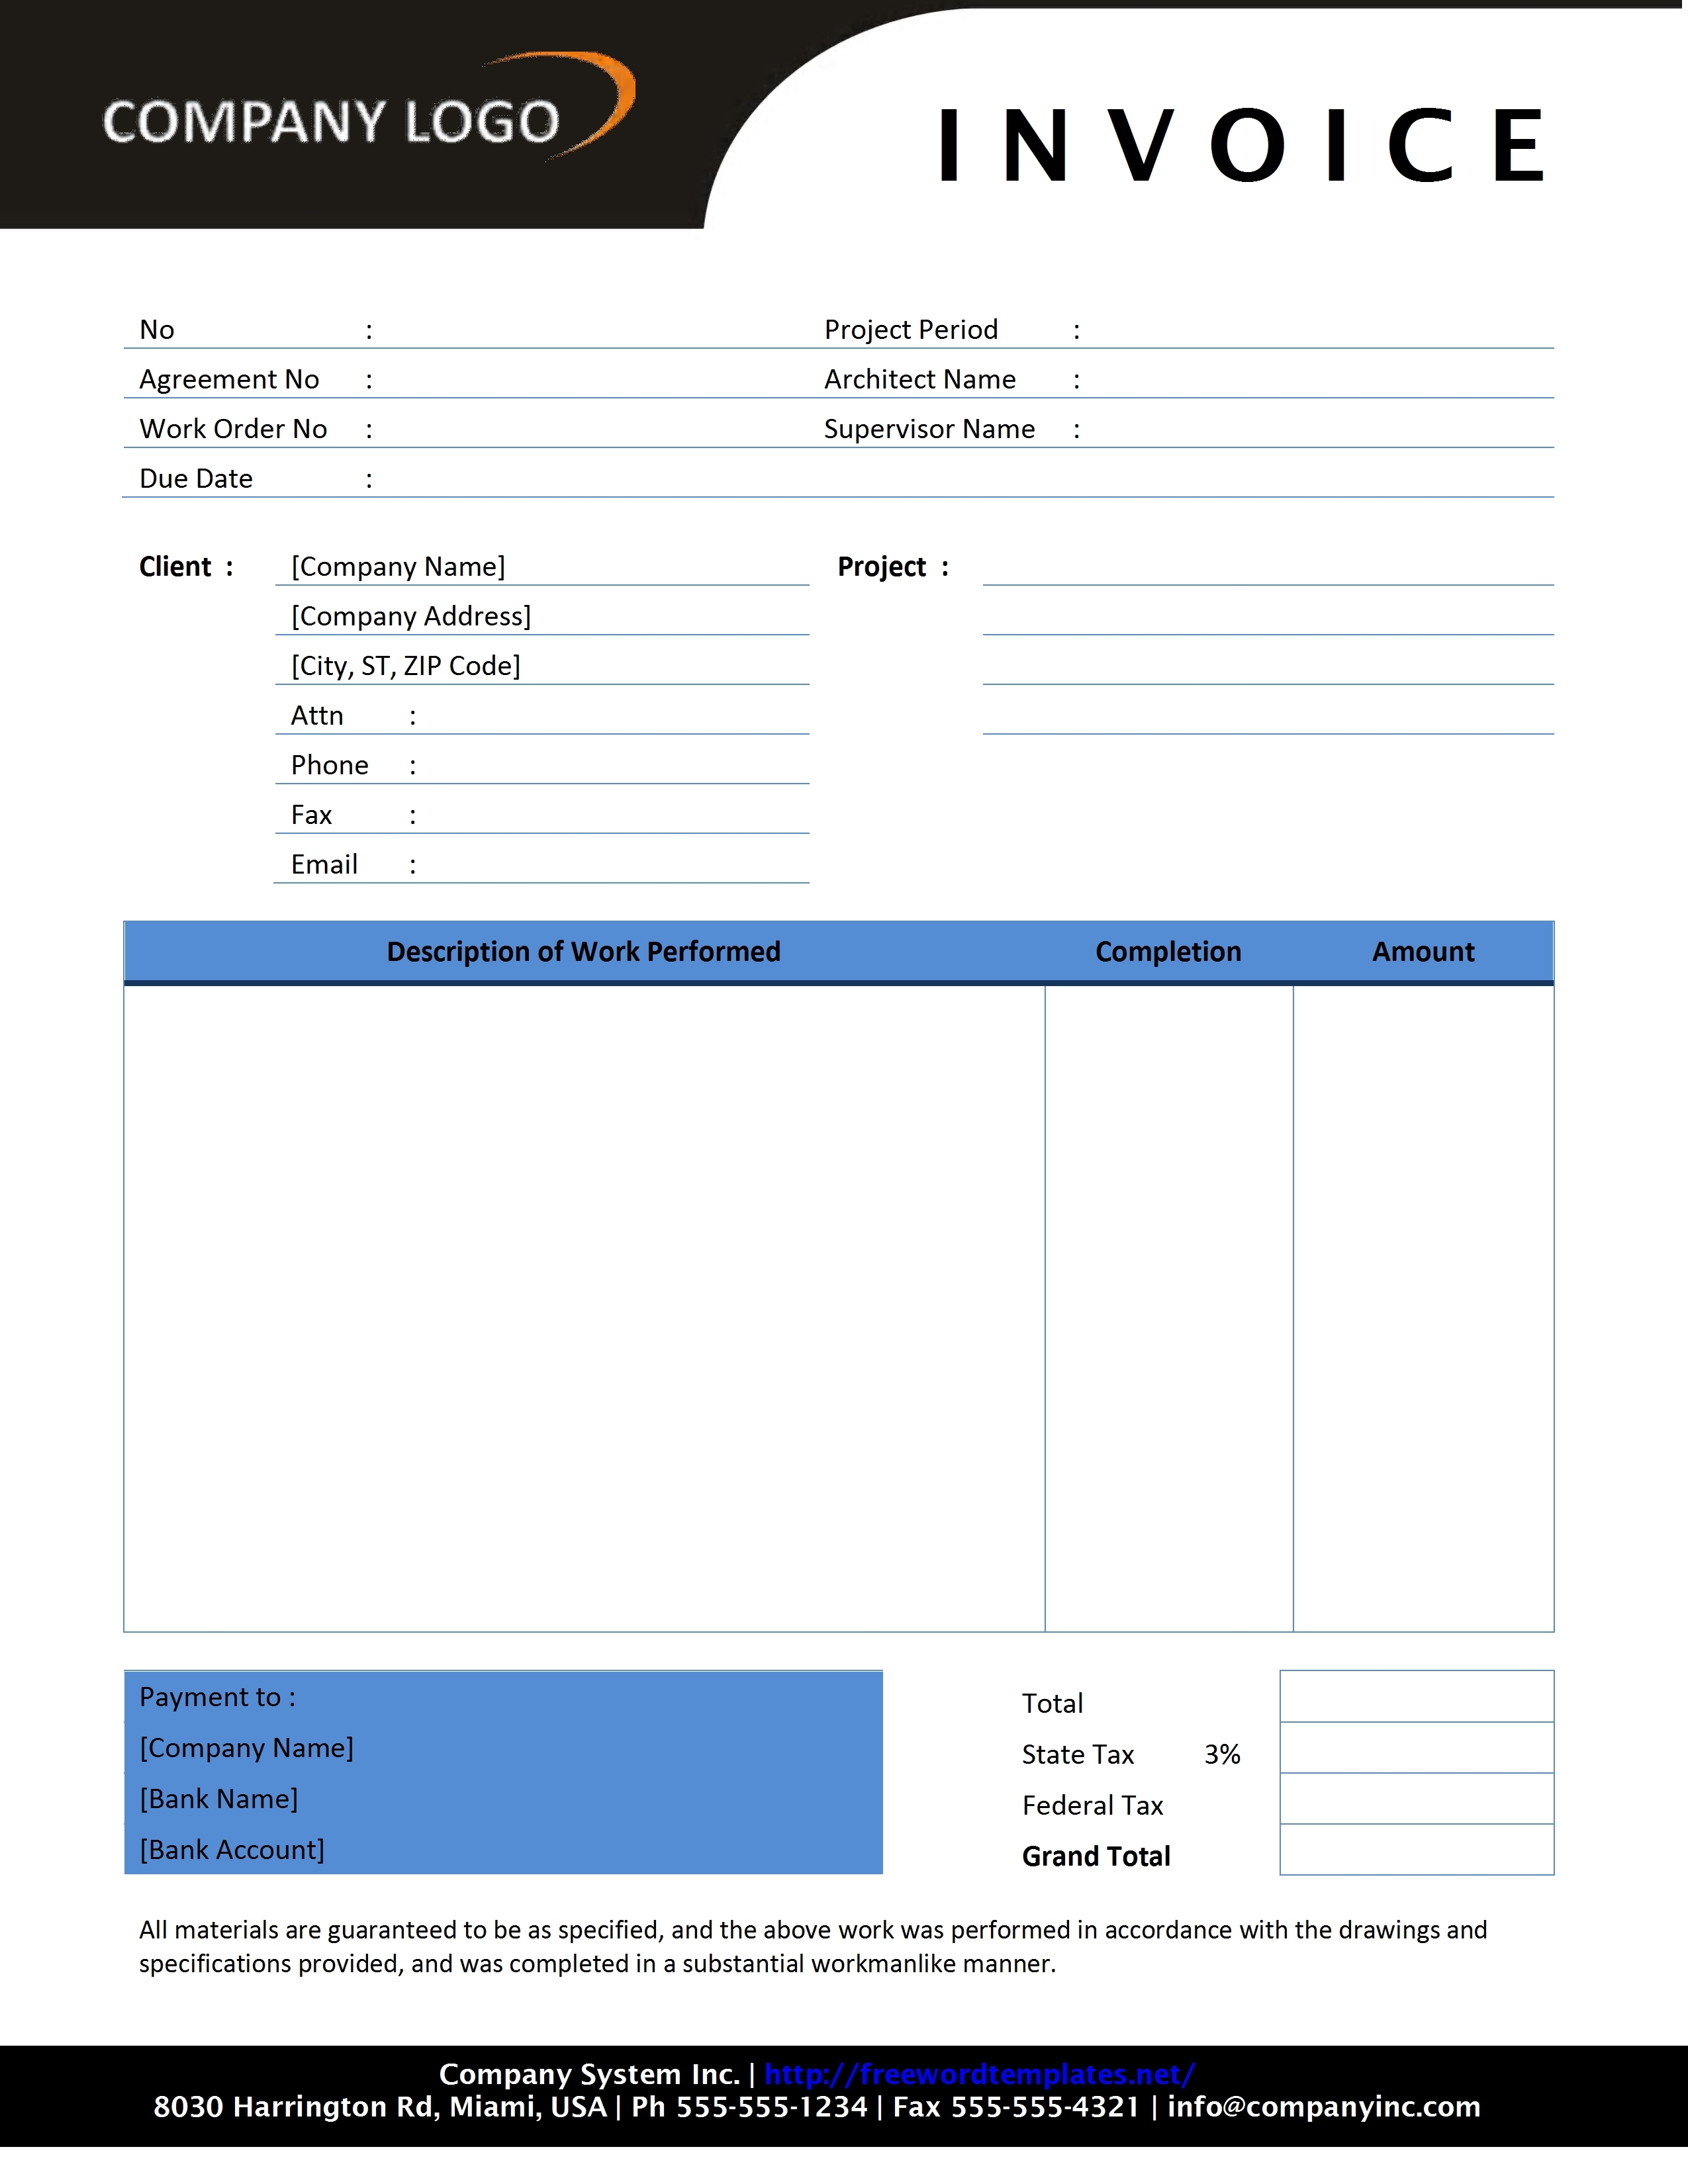 invoice sample word document contractor invoice template free microsoft word templates 2550 X 3300